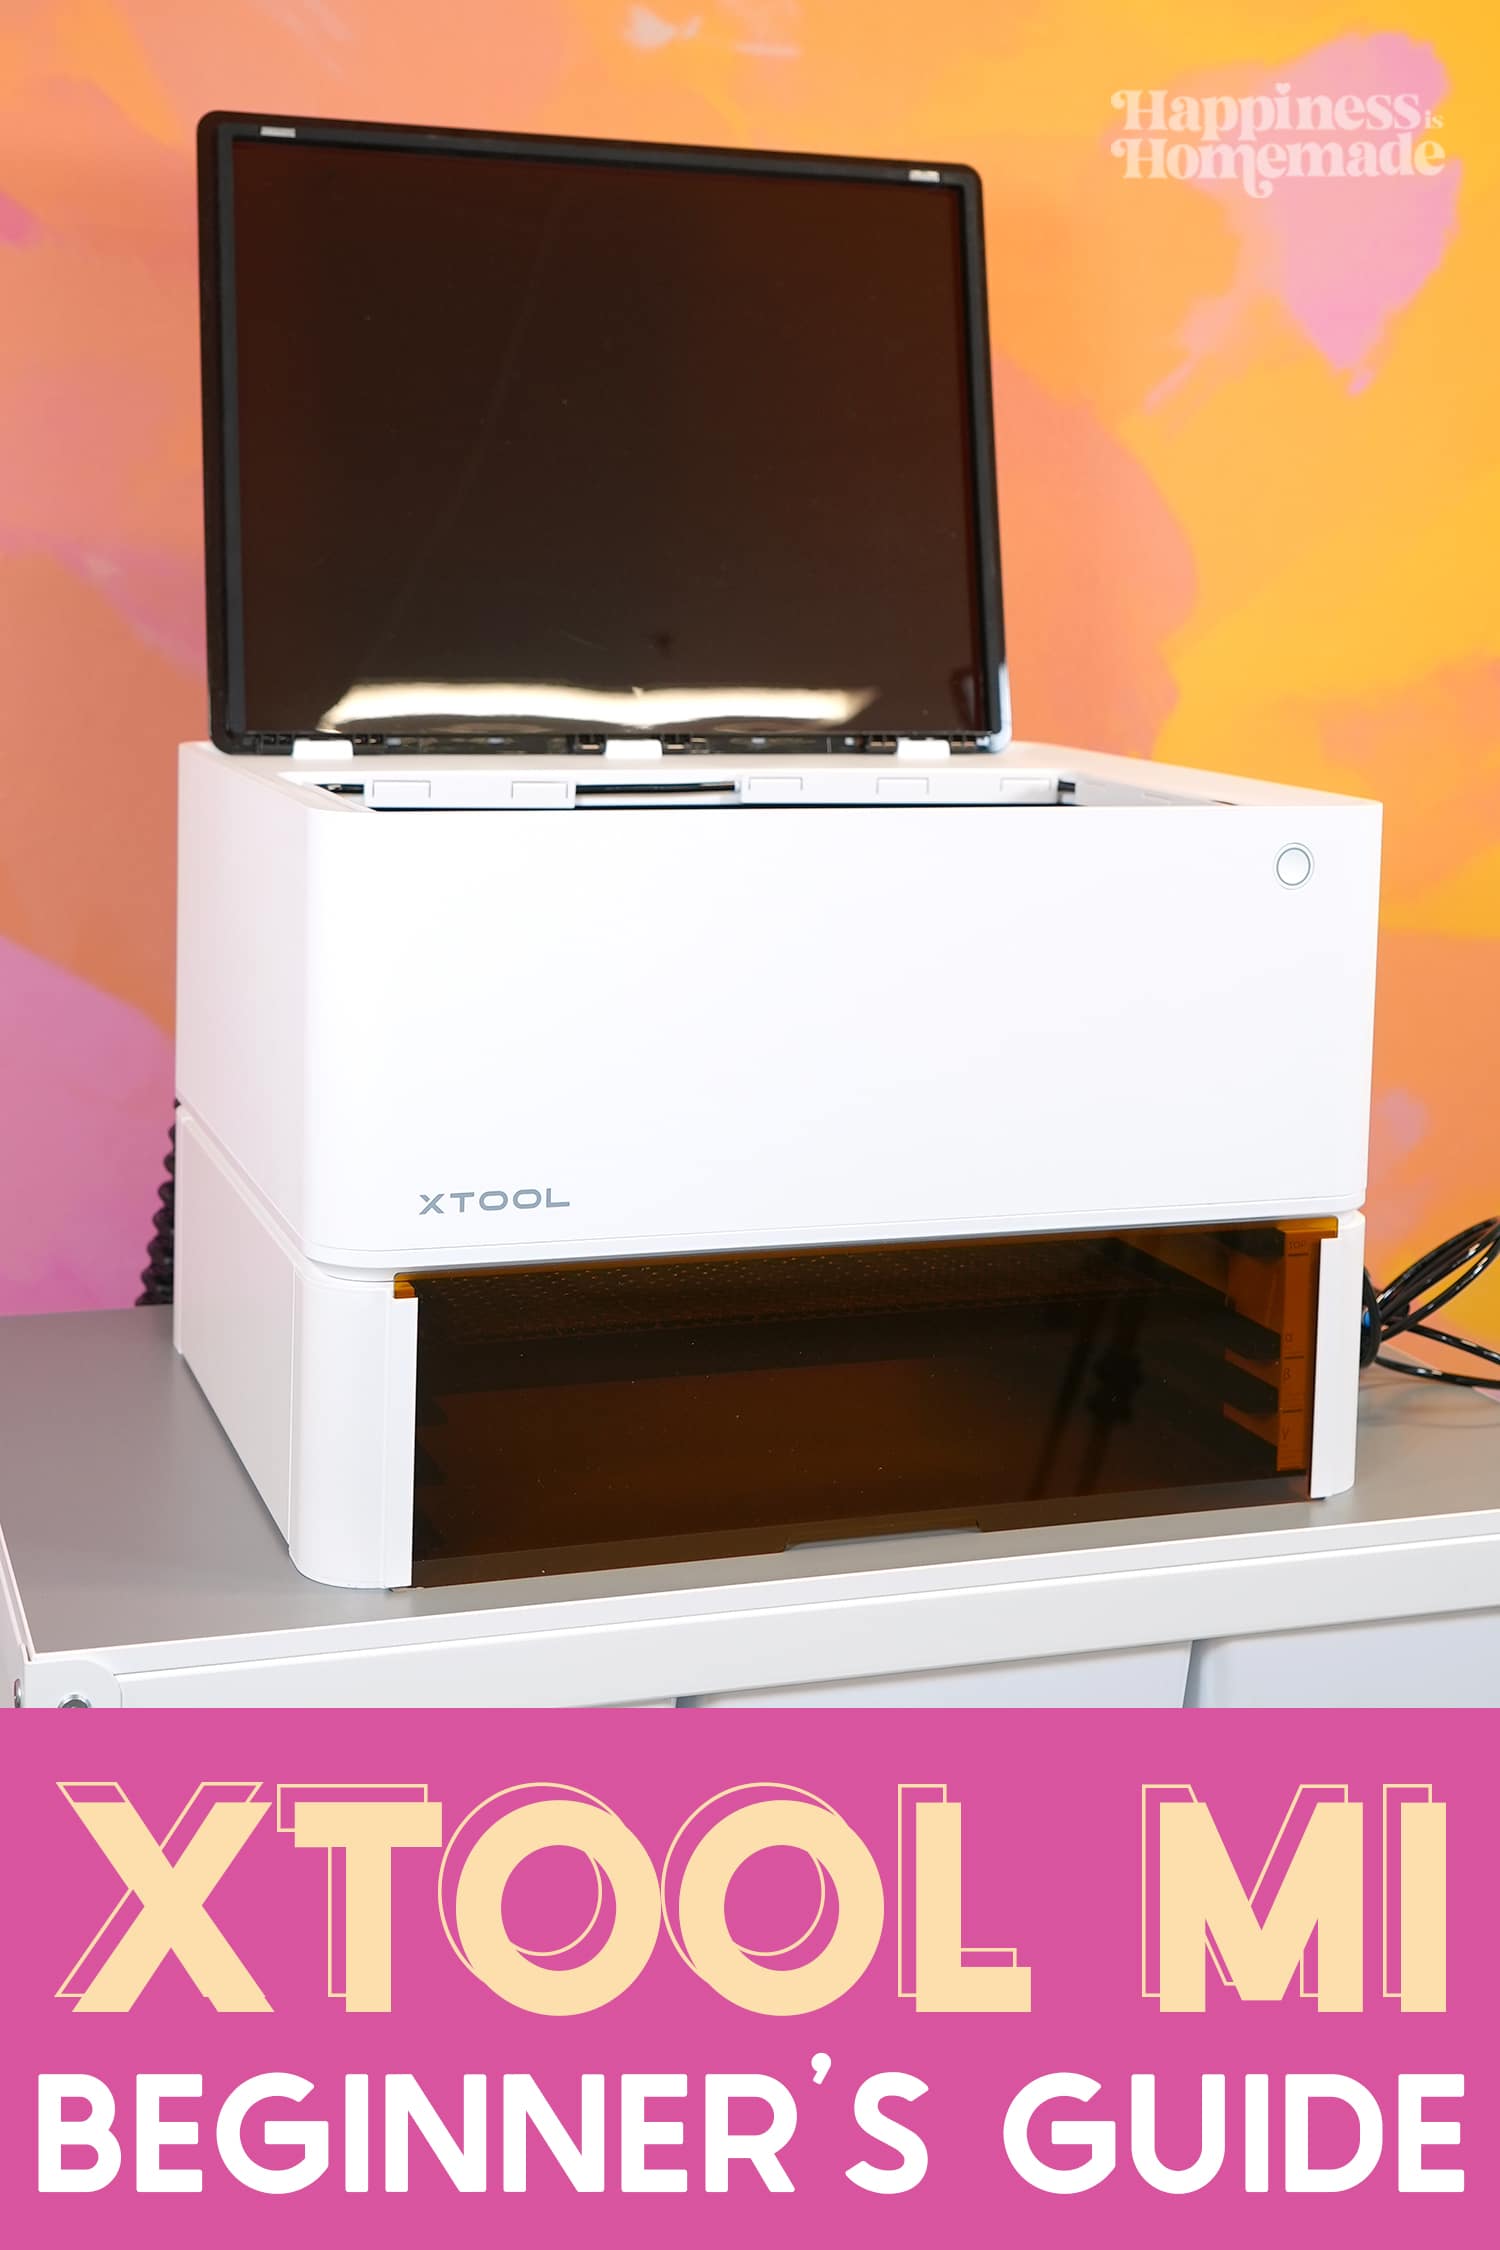 xTool M1 Review: Beginner's Guide to Laser Cutting - The